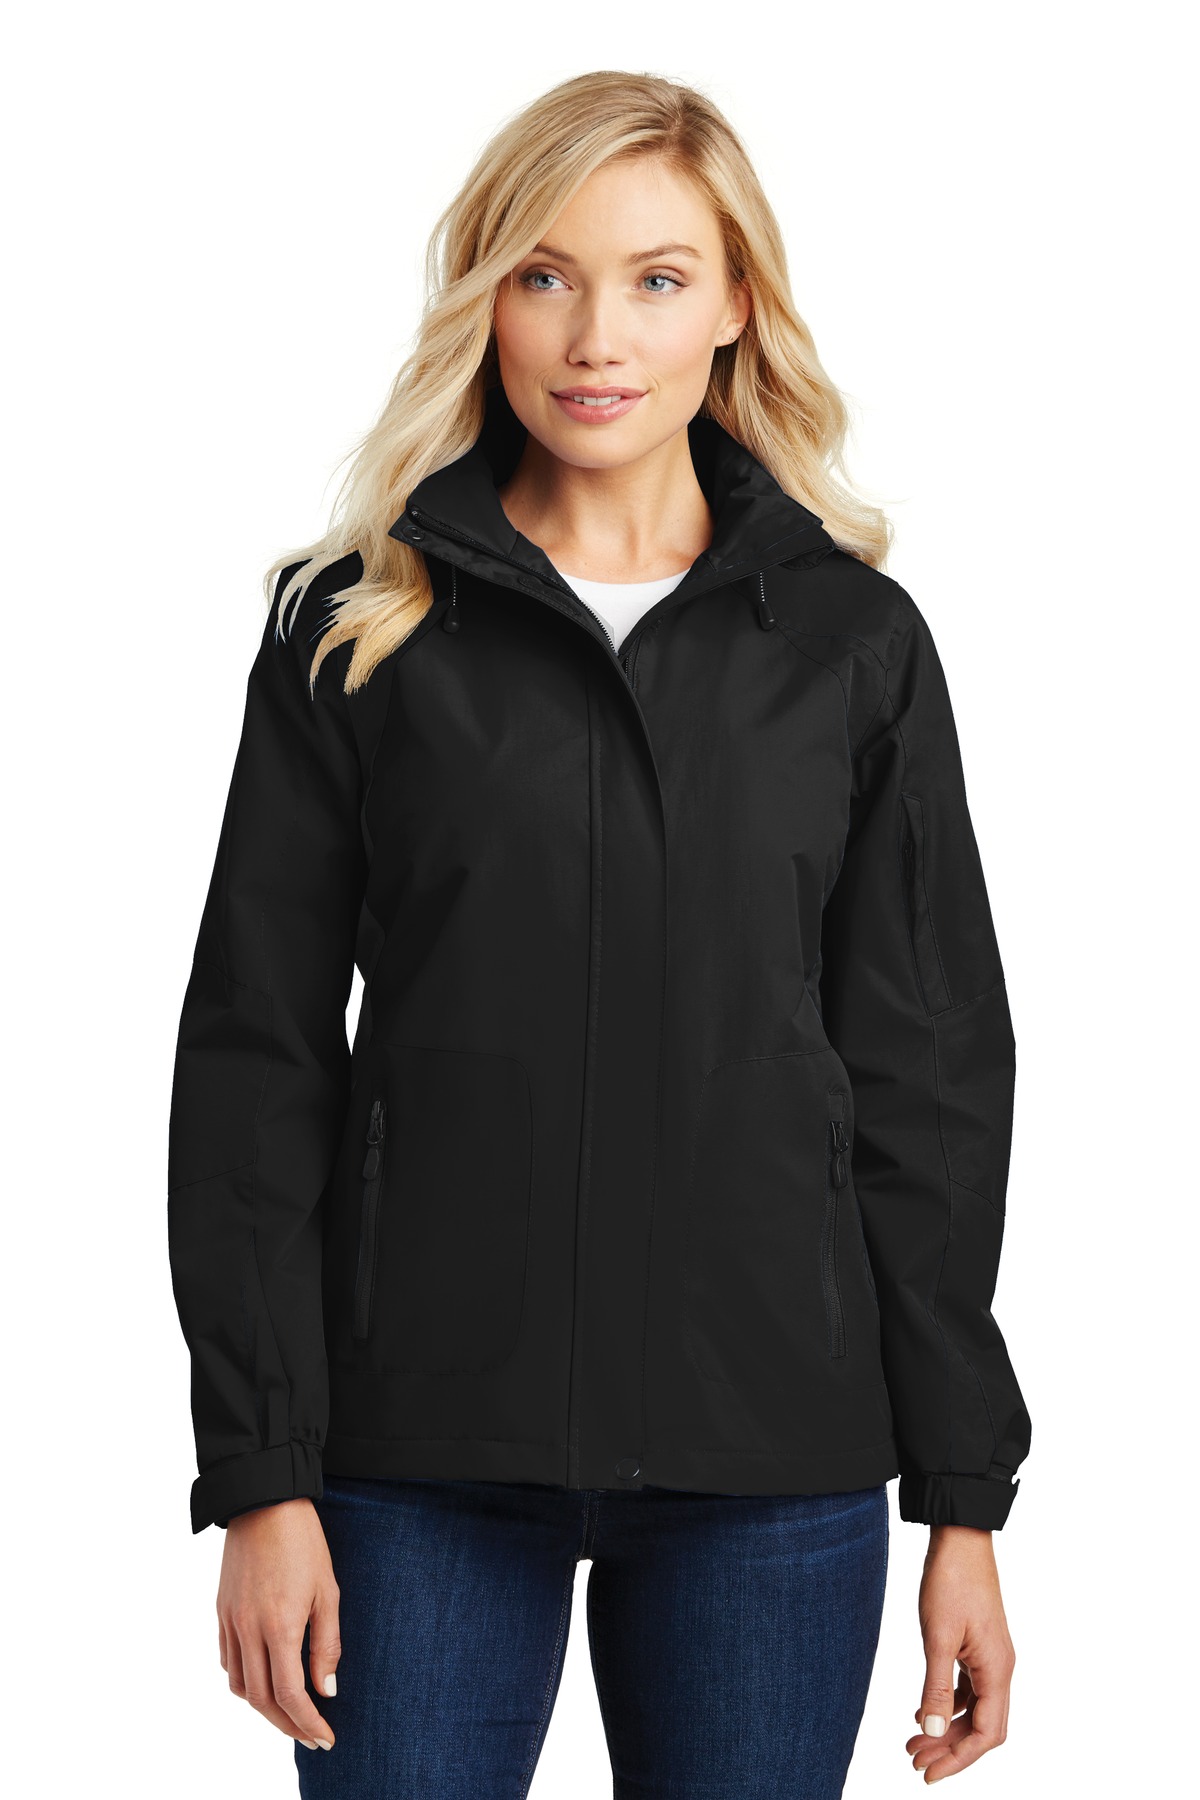 Port Authority Ladies Outerwear for Hospitality ® Ladies All-Season II Jacket.-Port Authority